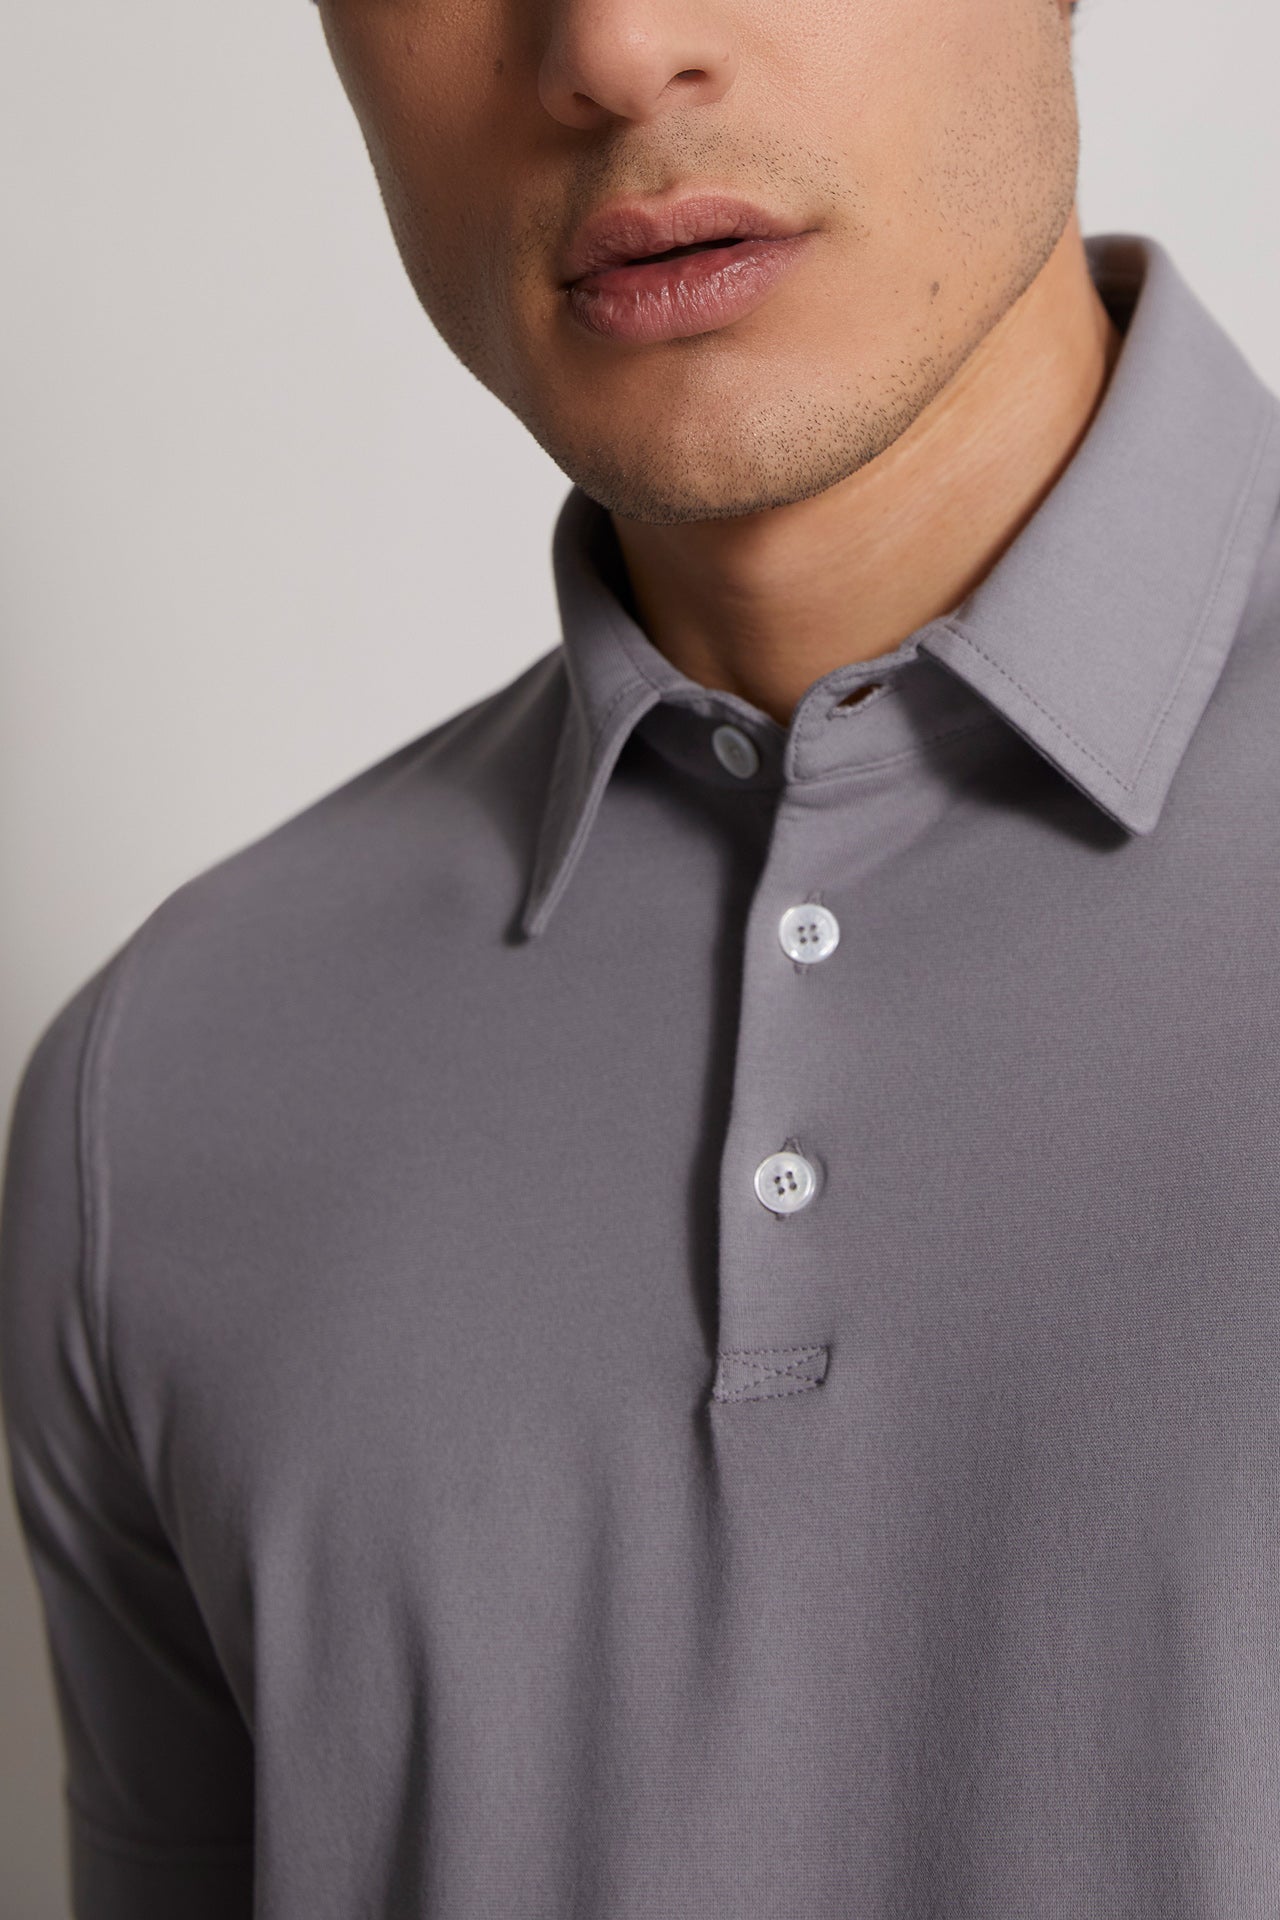 men's iconic cotton polo jersey in light grey - neck detail